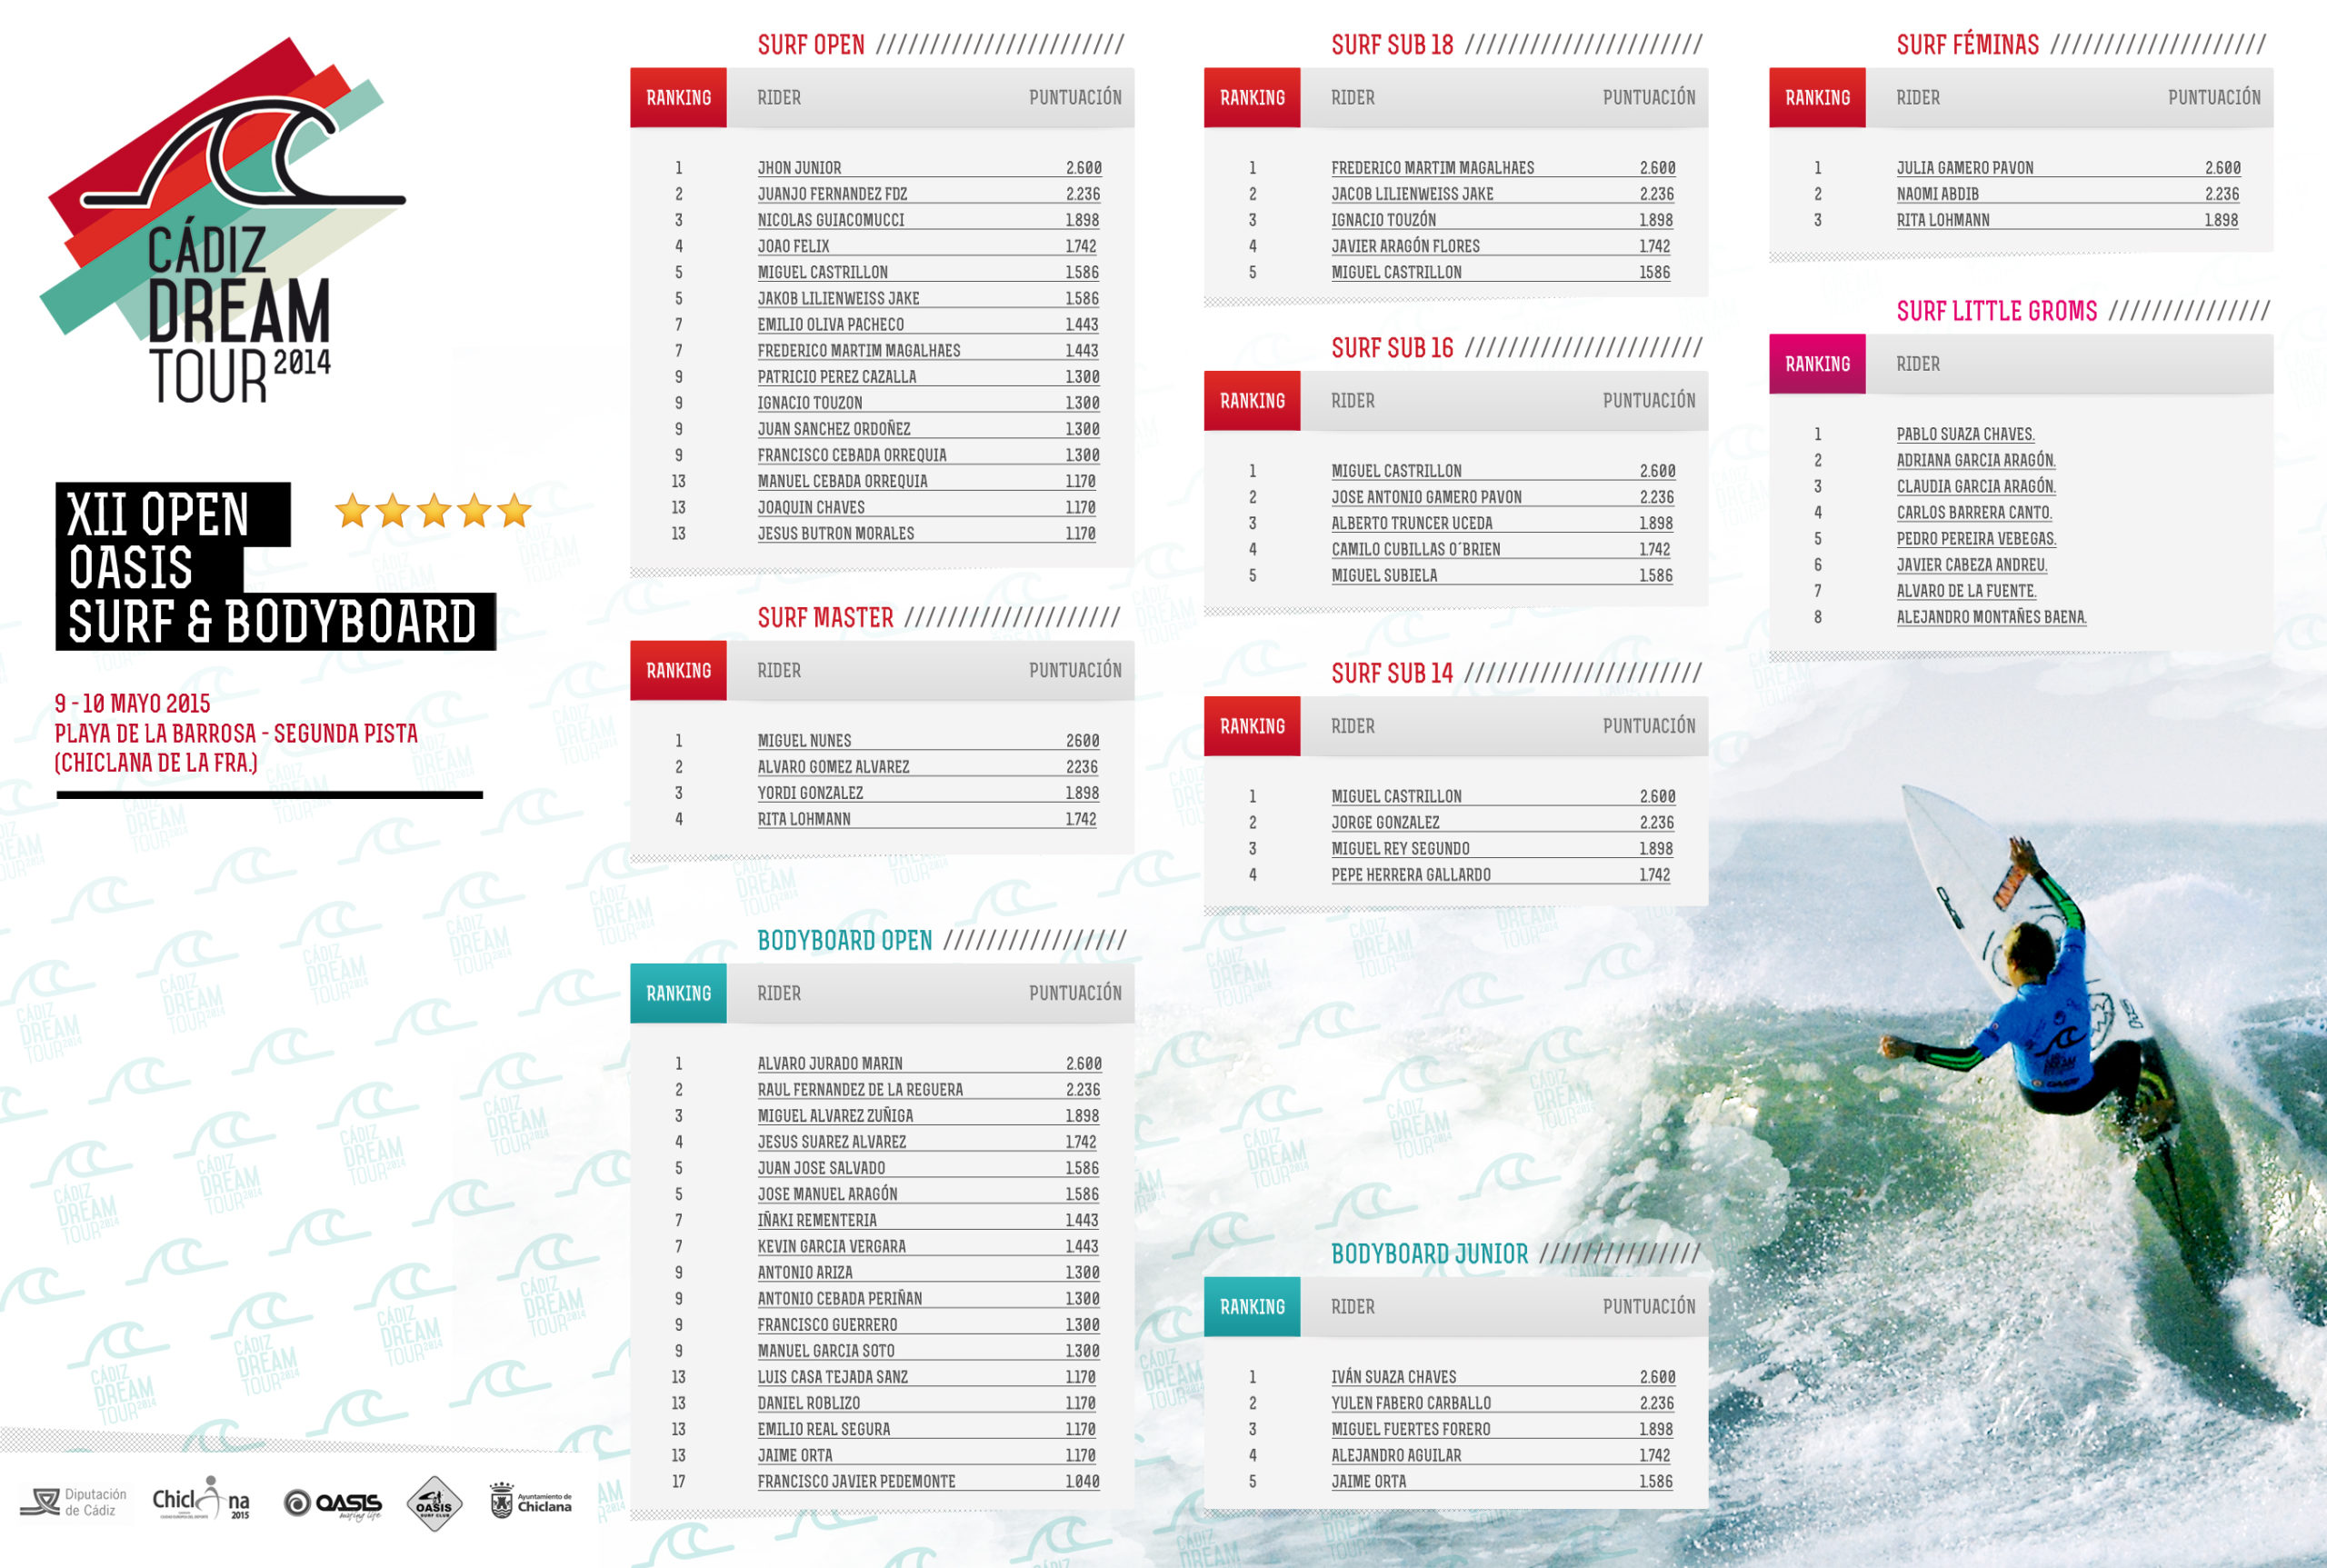 Ranking XII Open Oasis Surf and Bodyboard